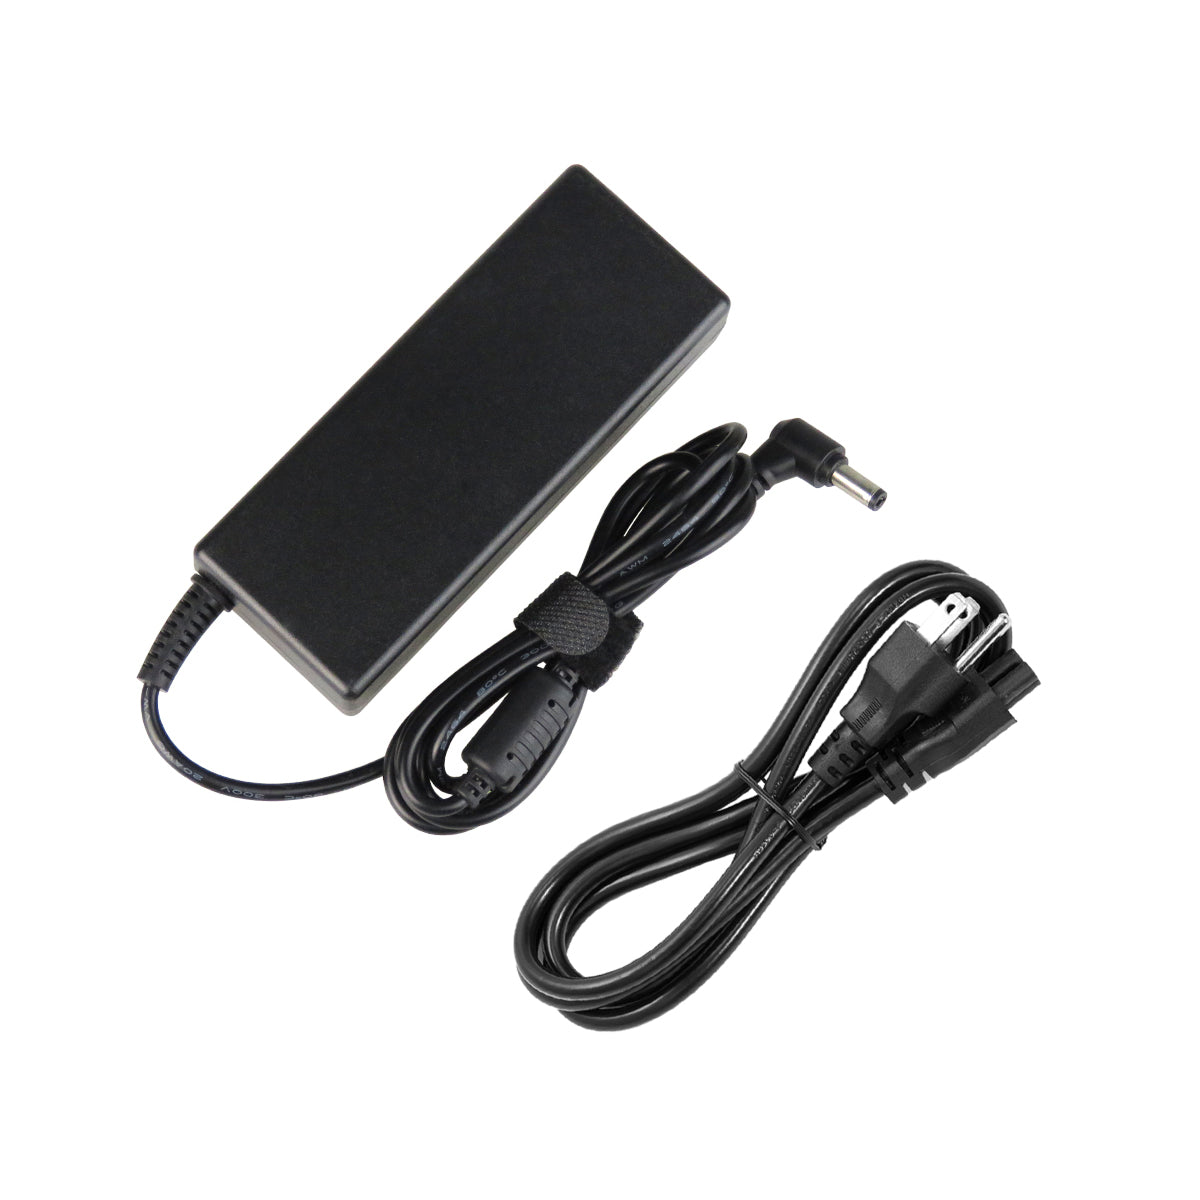 AC Adapter Charger for ASUS K53U Notebook.